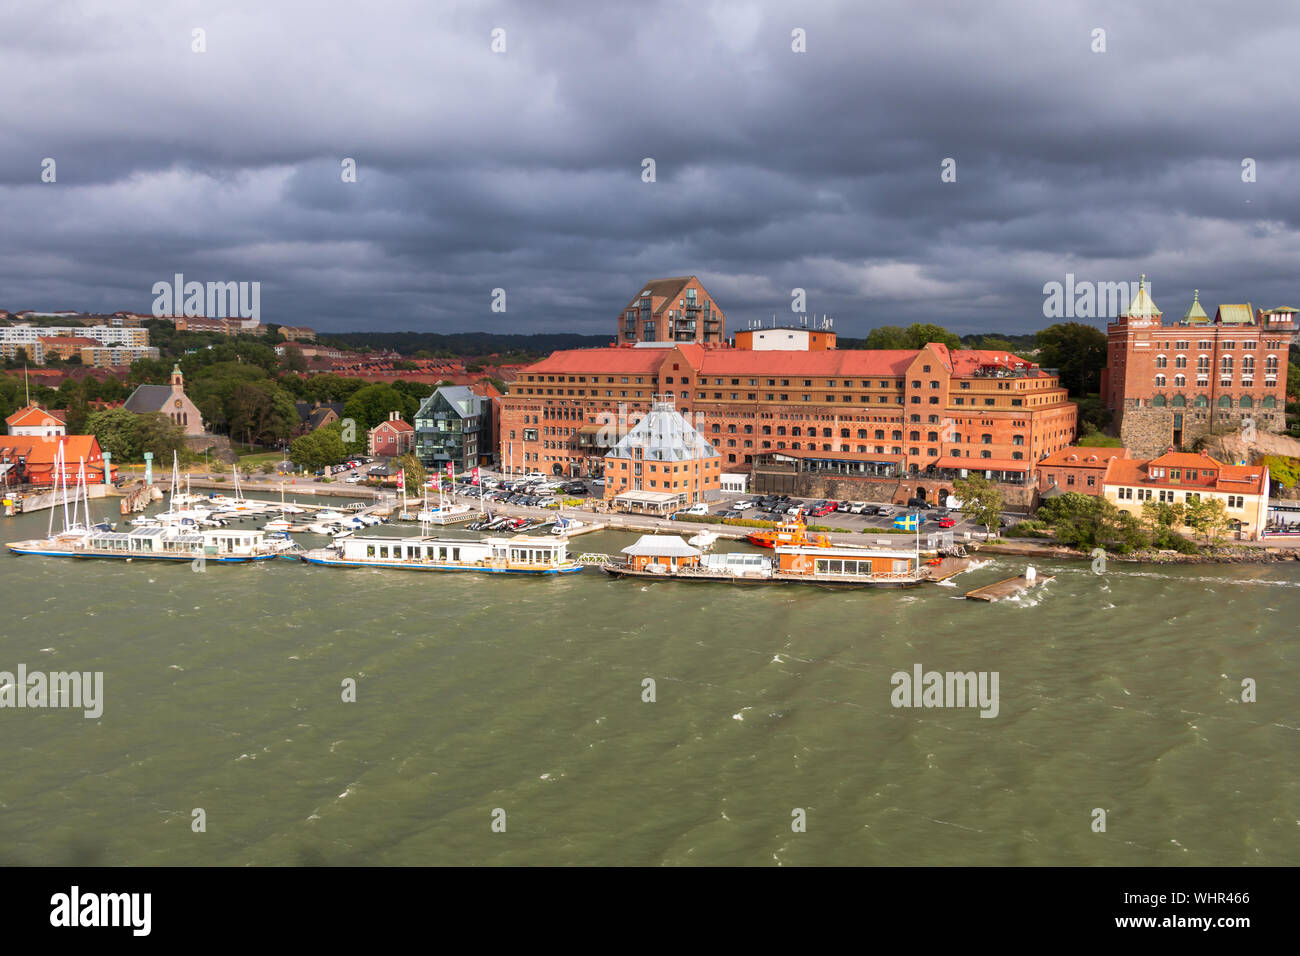 Gothenburg a beautiful city in Sweden, a view from the river Gota Alv on the shore line with boats and nice buildings Stock Photo